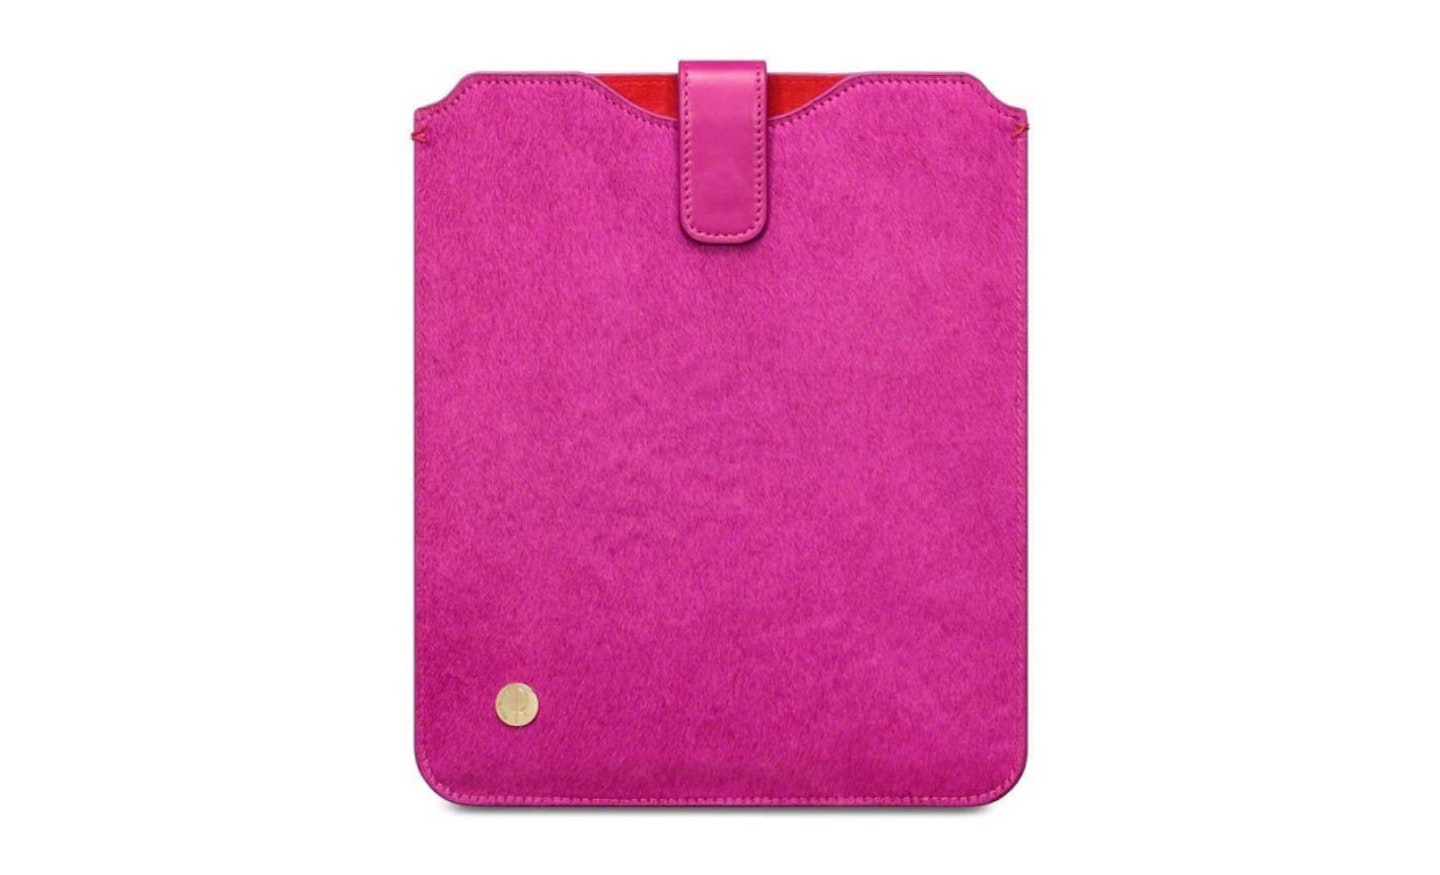 Rosie Fortescue for Case Hut iPad Pouch